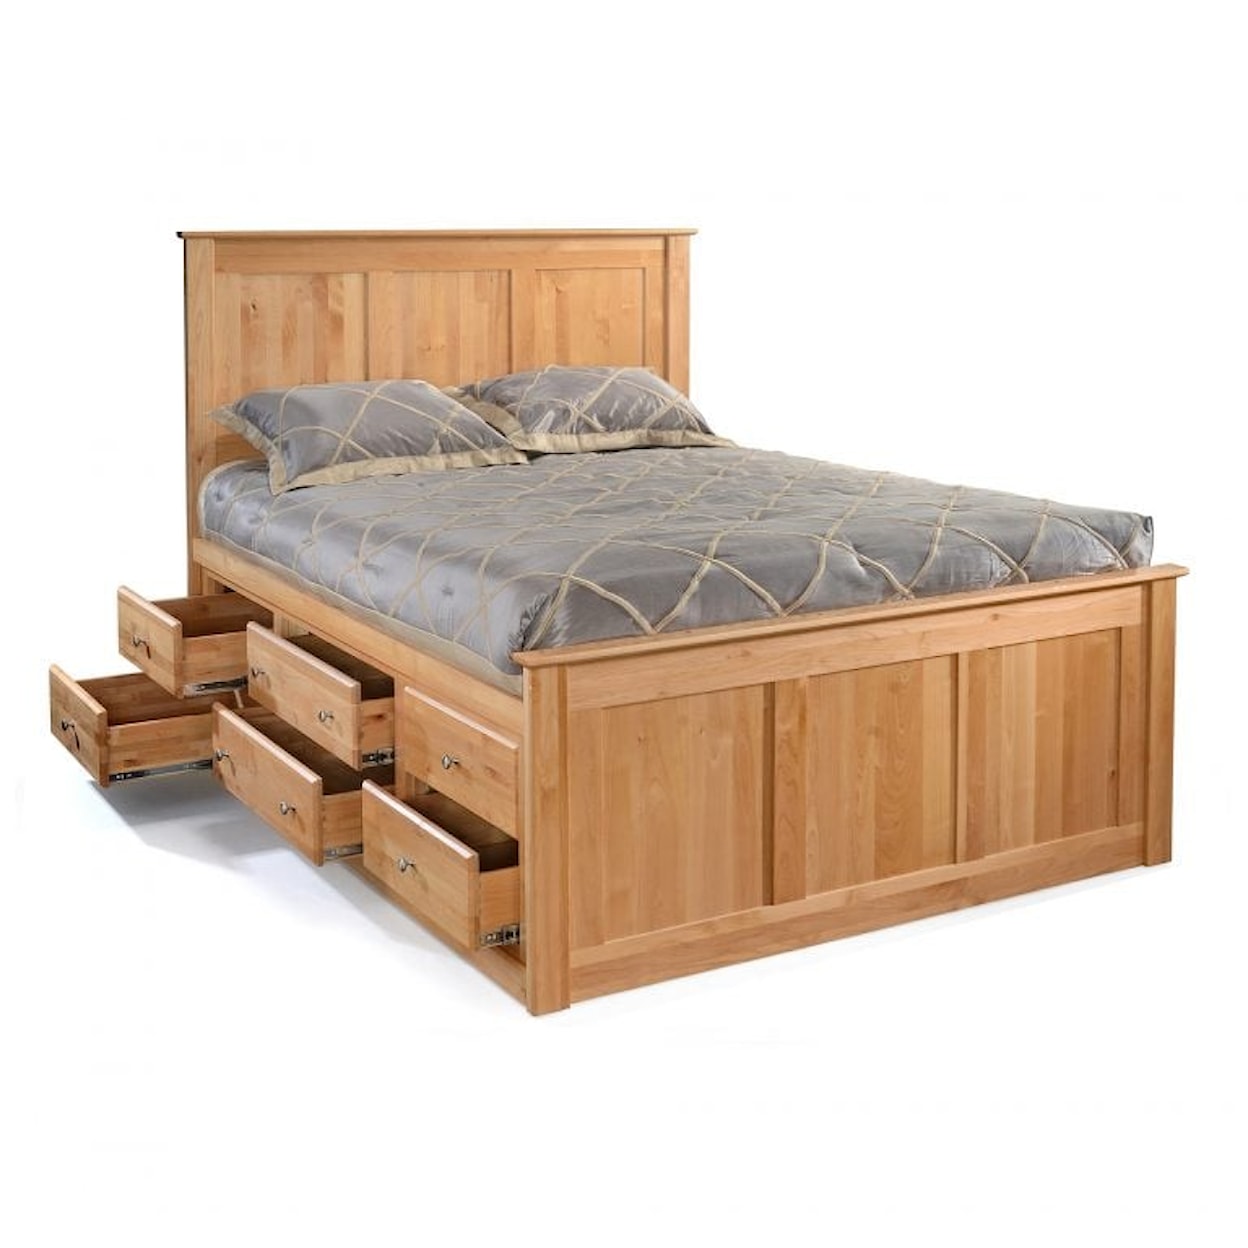 Archbold Furniture Chest Bed Queen 12-Drawer Chest Bed